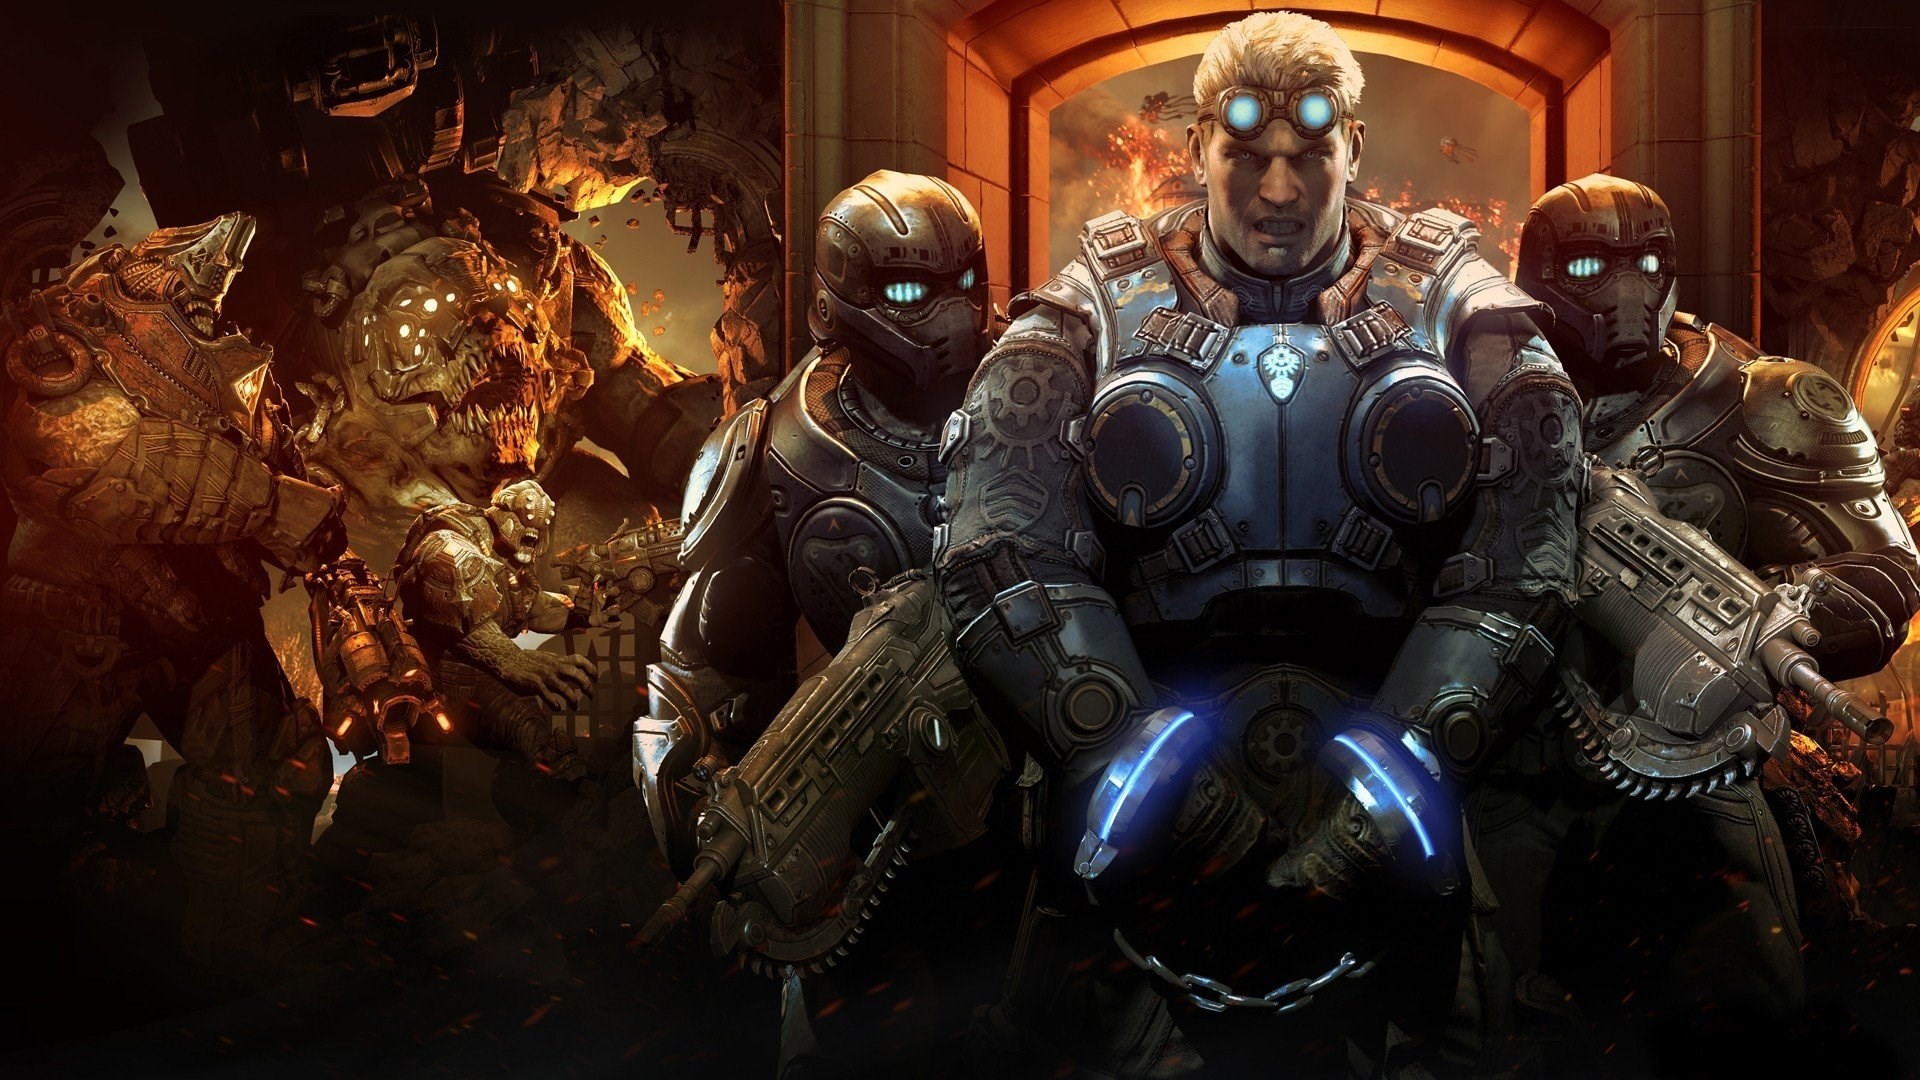 1920x1080 gears of war judgment theme background images, 466 kB - Worley Longman